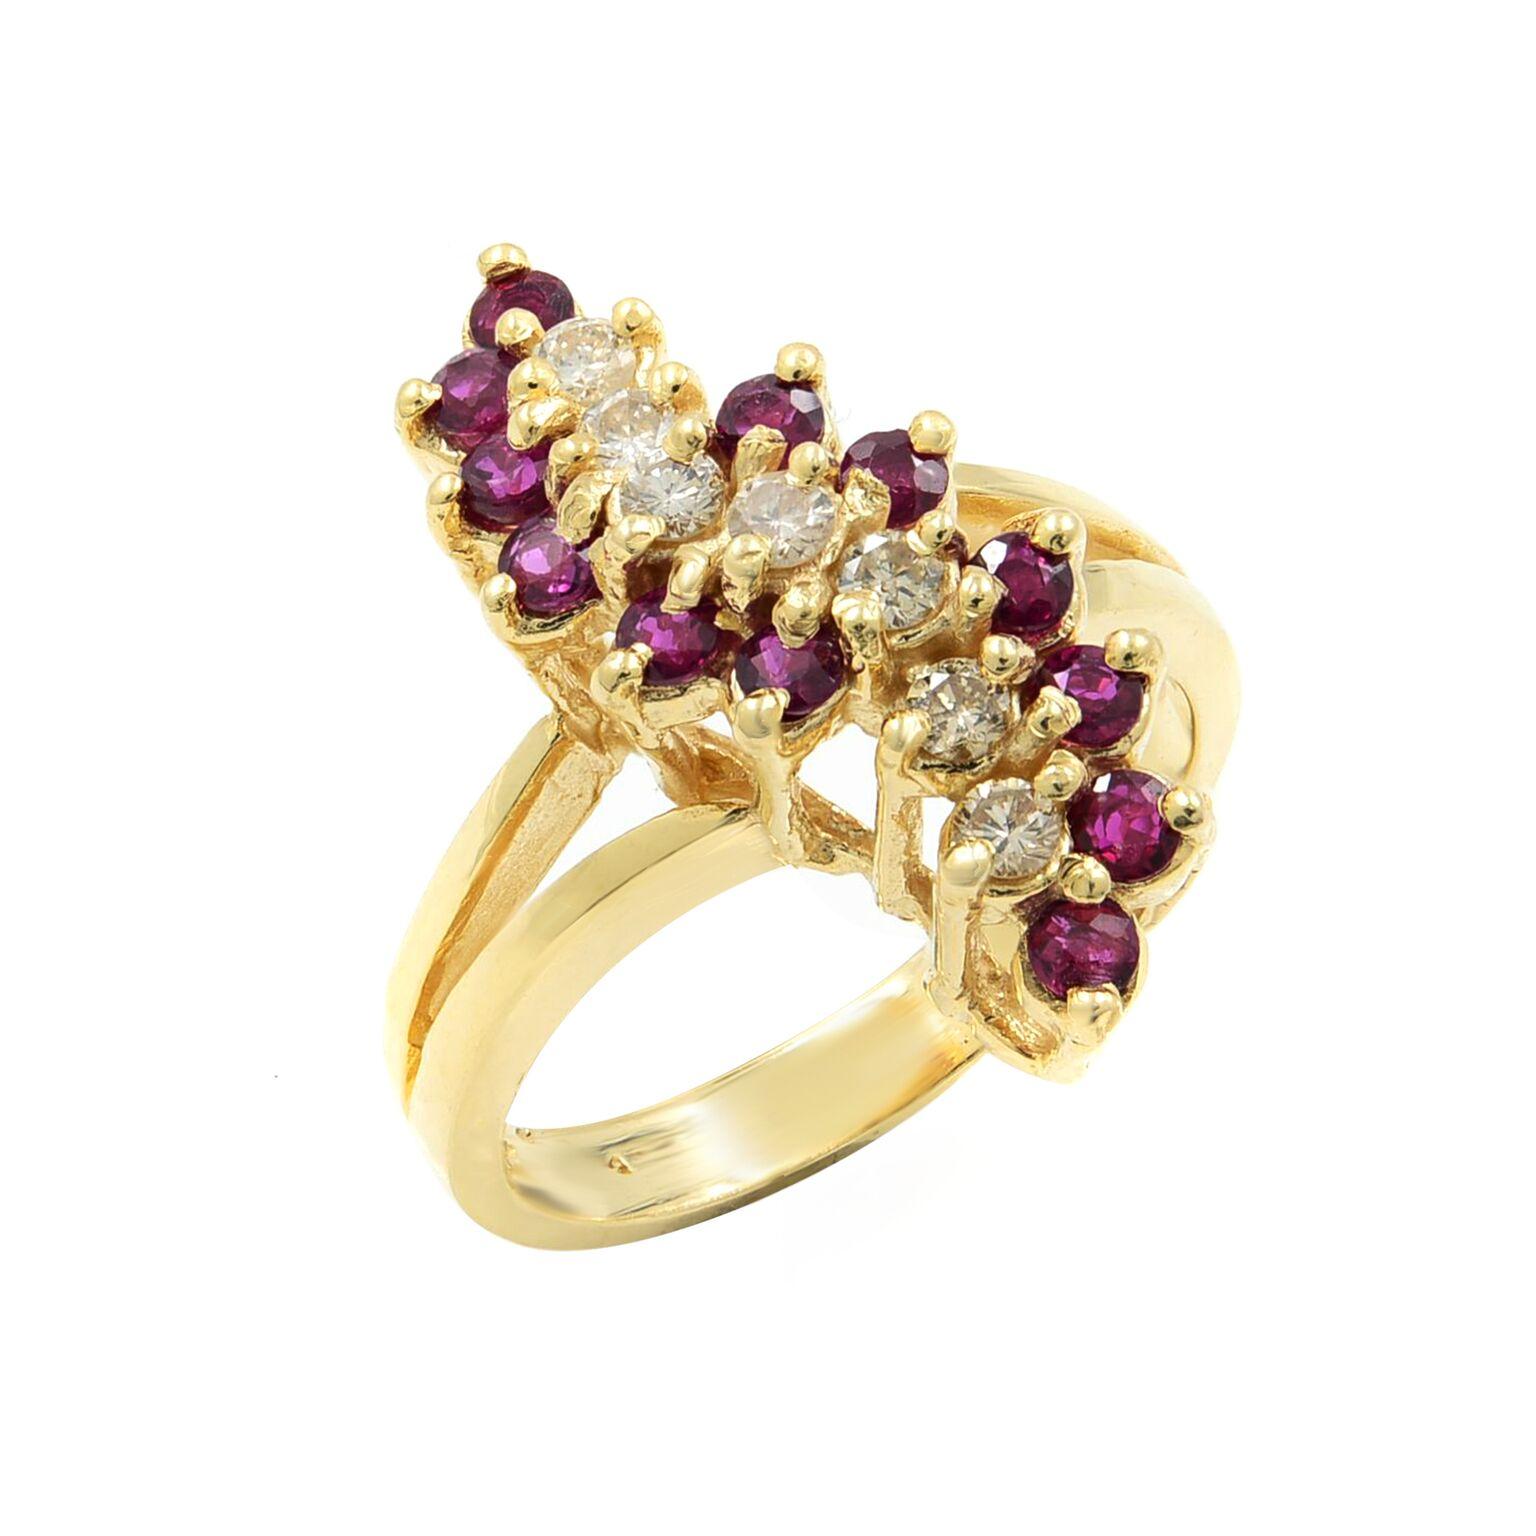 Diamonds and rubies together weighing .80 carat, join forces to create a fabulous flash in this retro era dazzler hand fabricated in rich 14K yellow gold - circa 1980. Currently ring size 6.
Ring length: 20mm. 